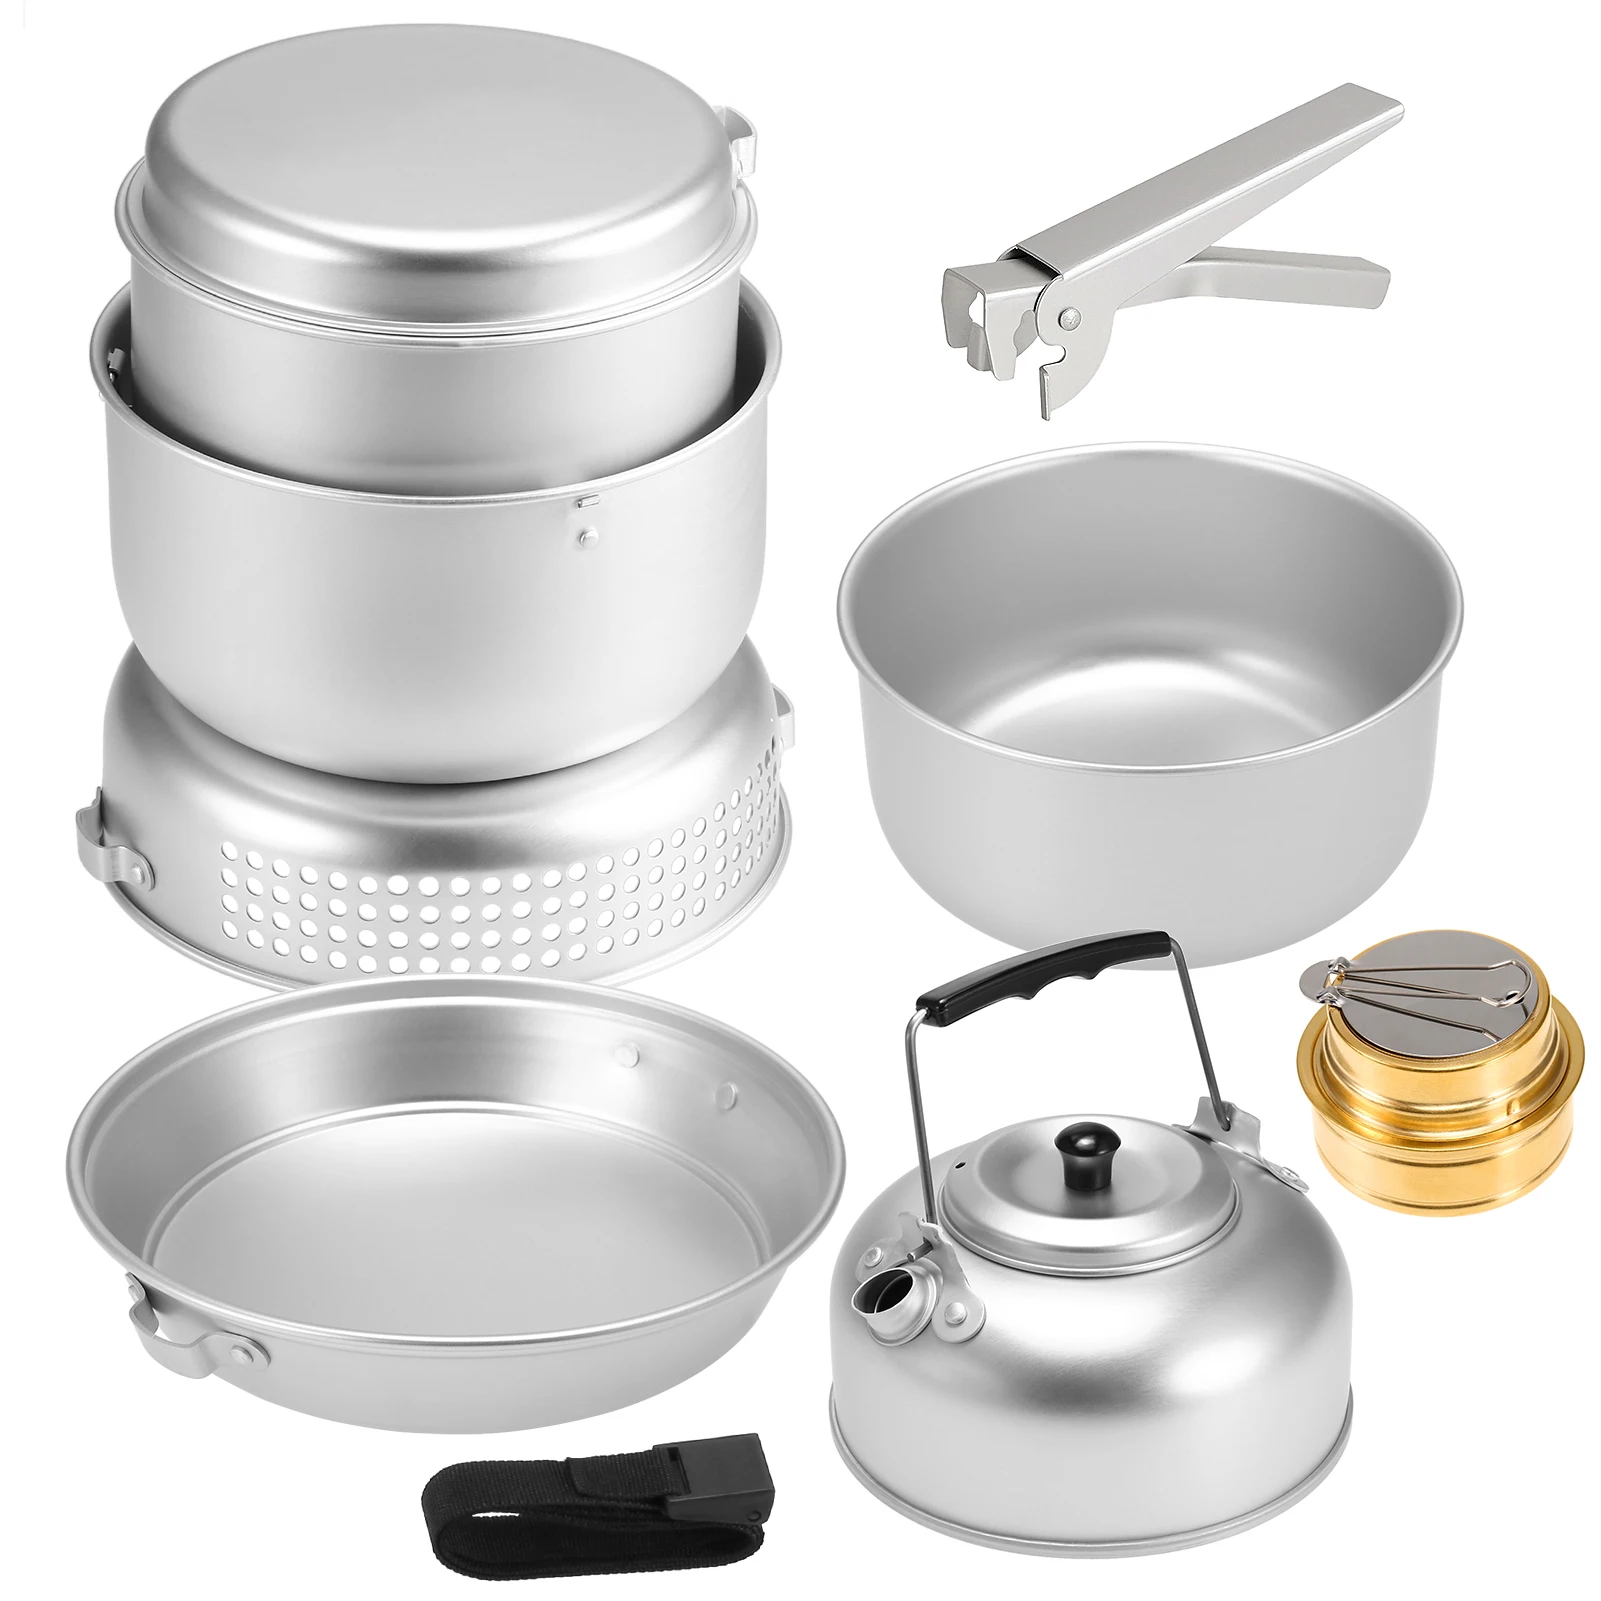 Details about   Outdoor Camping Stove Kit Dish Plates Pots Water Kettle Stove Hand Vice 10 PCS